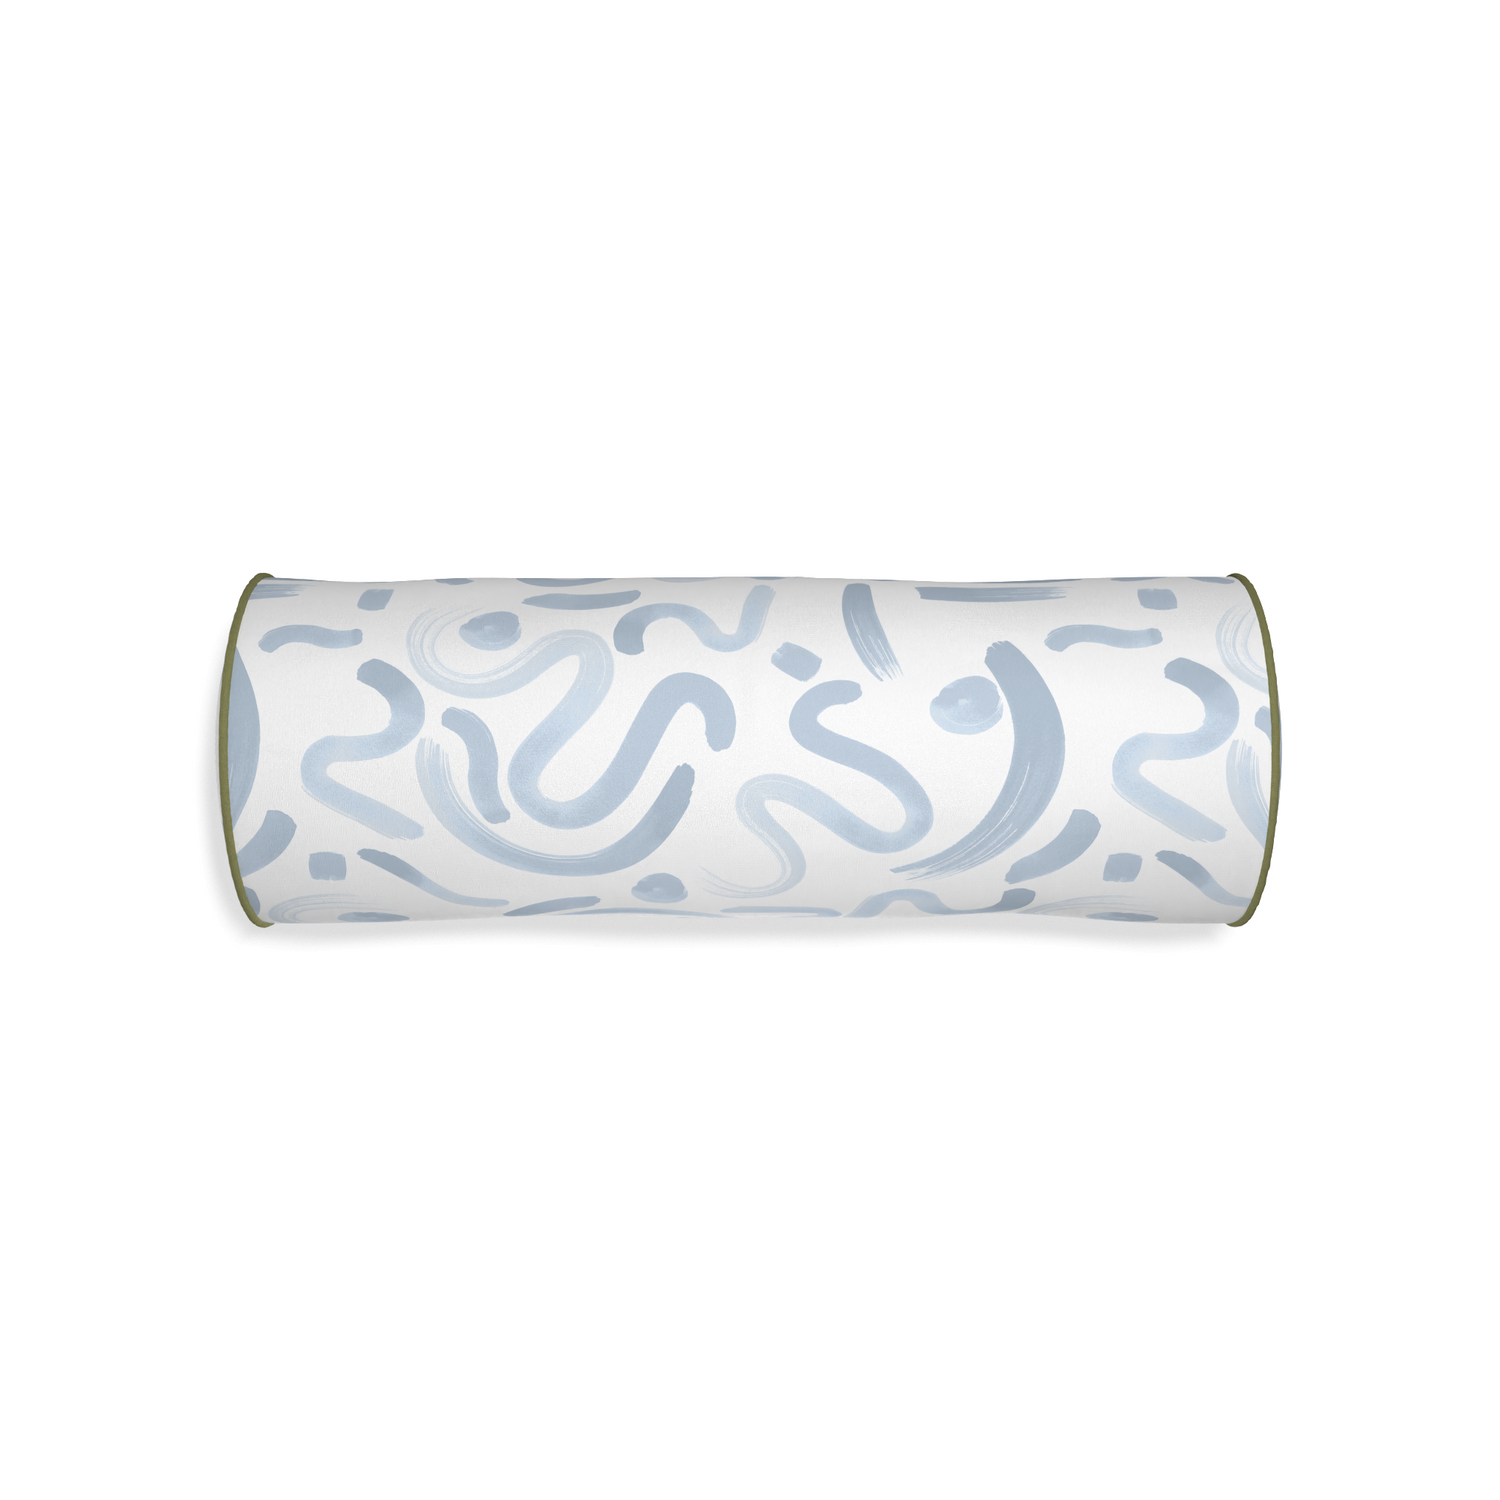 Bolster hockney sky custom abstract sky bluepillow with moss piping on white background